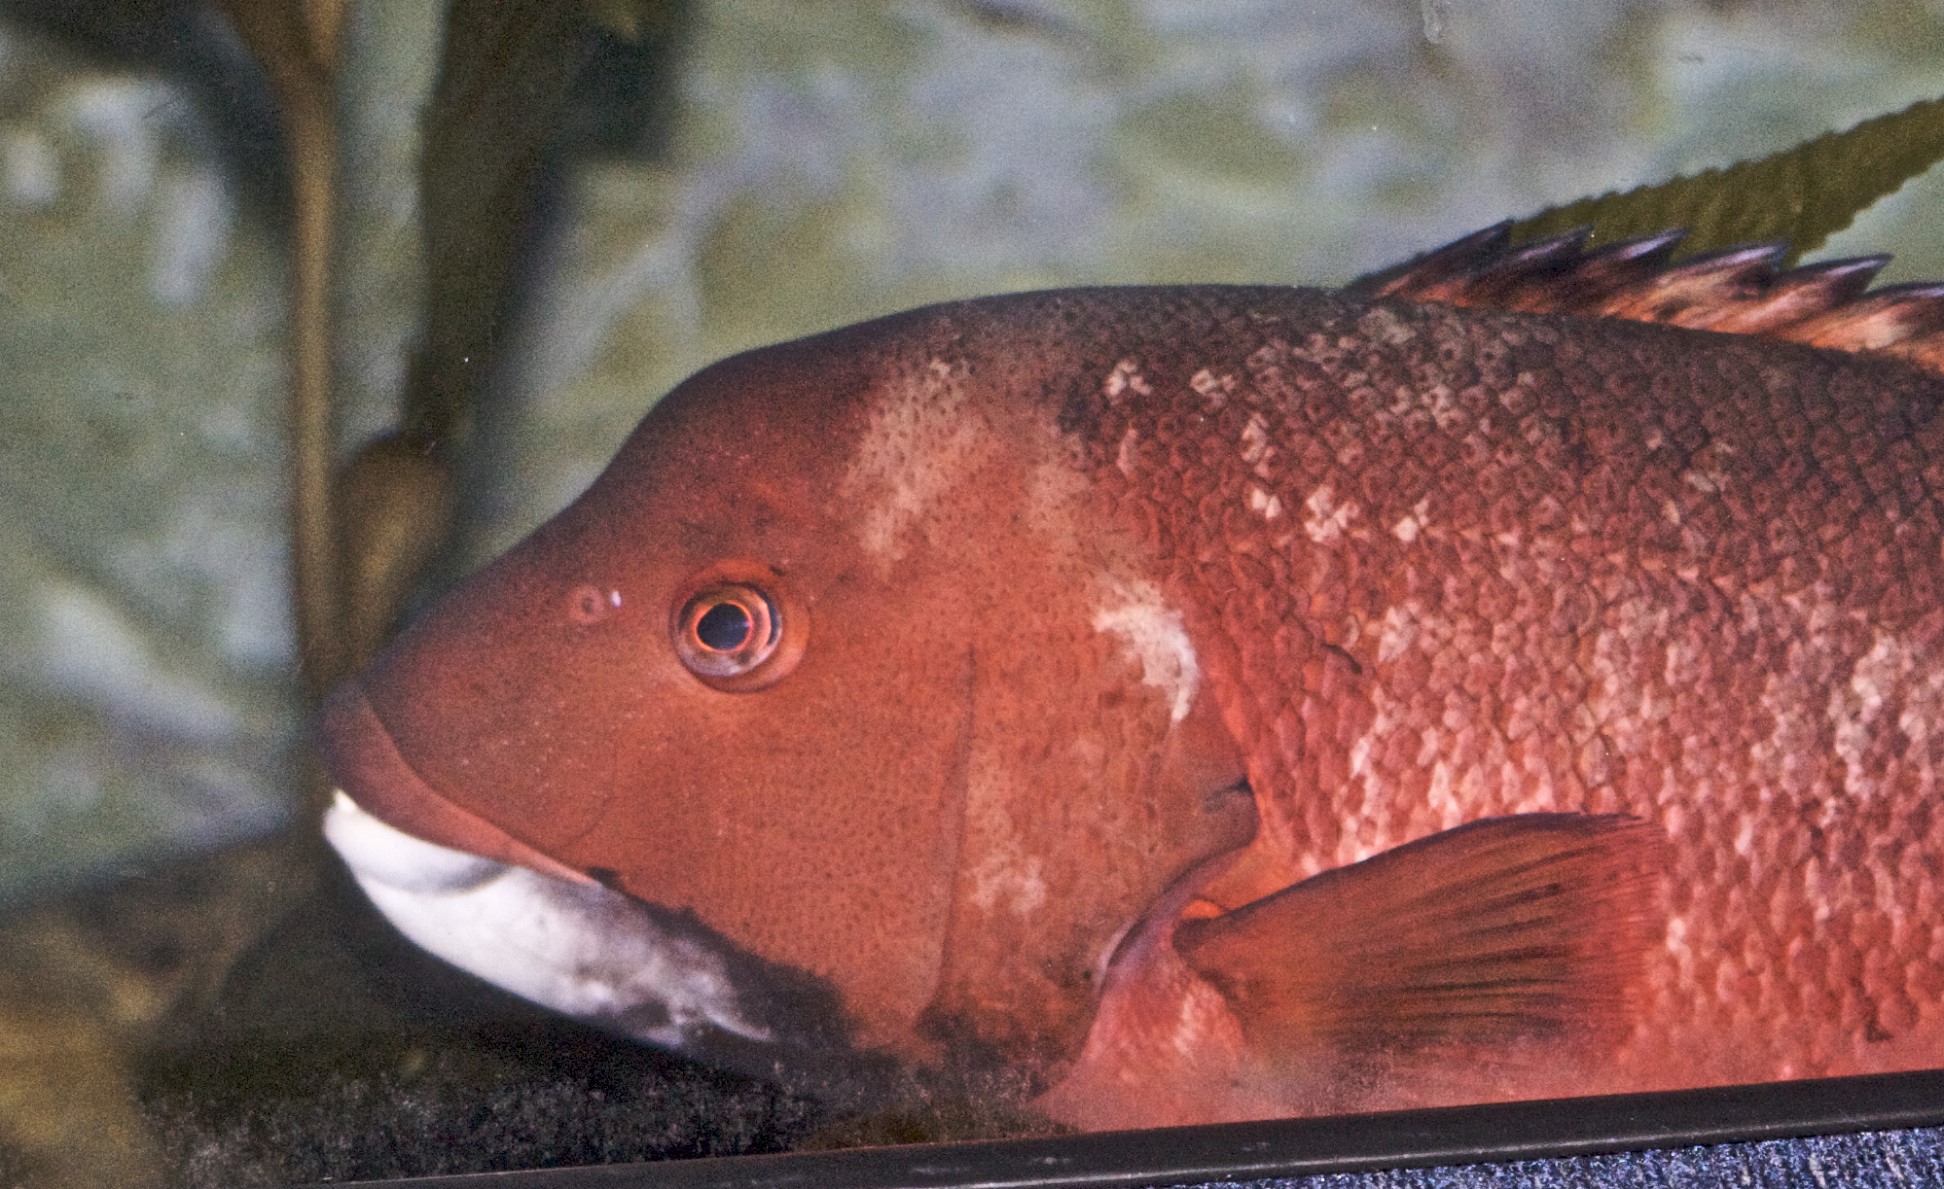 a large fish with long white tipped tails and red fins